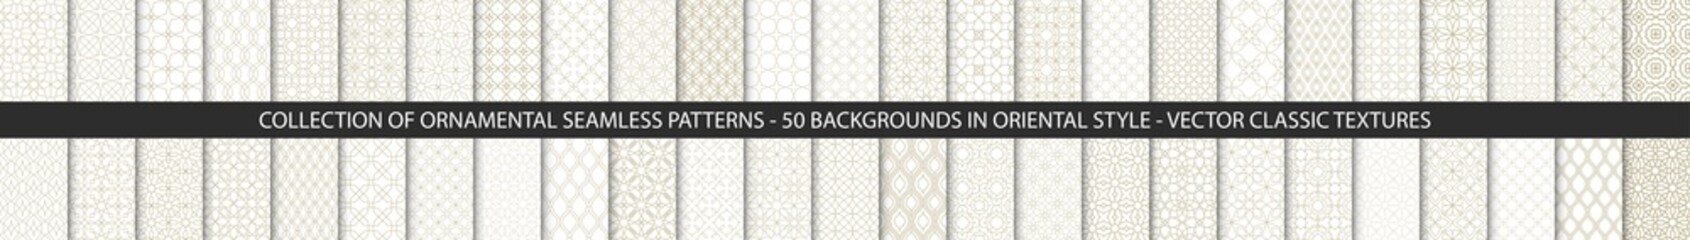 Super Big set of 50 oriental patterns. White and gold background with Arabic ornaments. Patterns, backgrounds and wallpapers for your design. Textile ornament. Vector illustration.